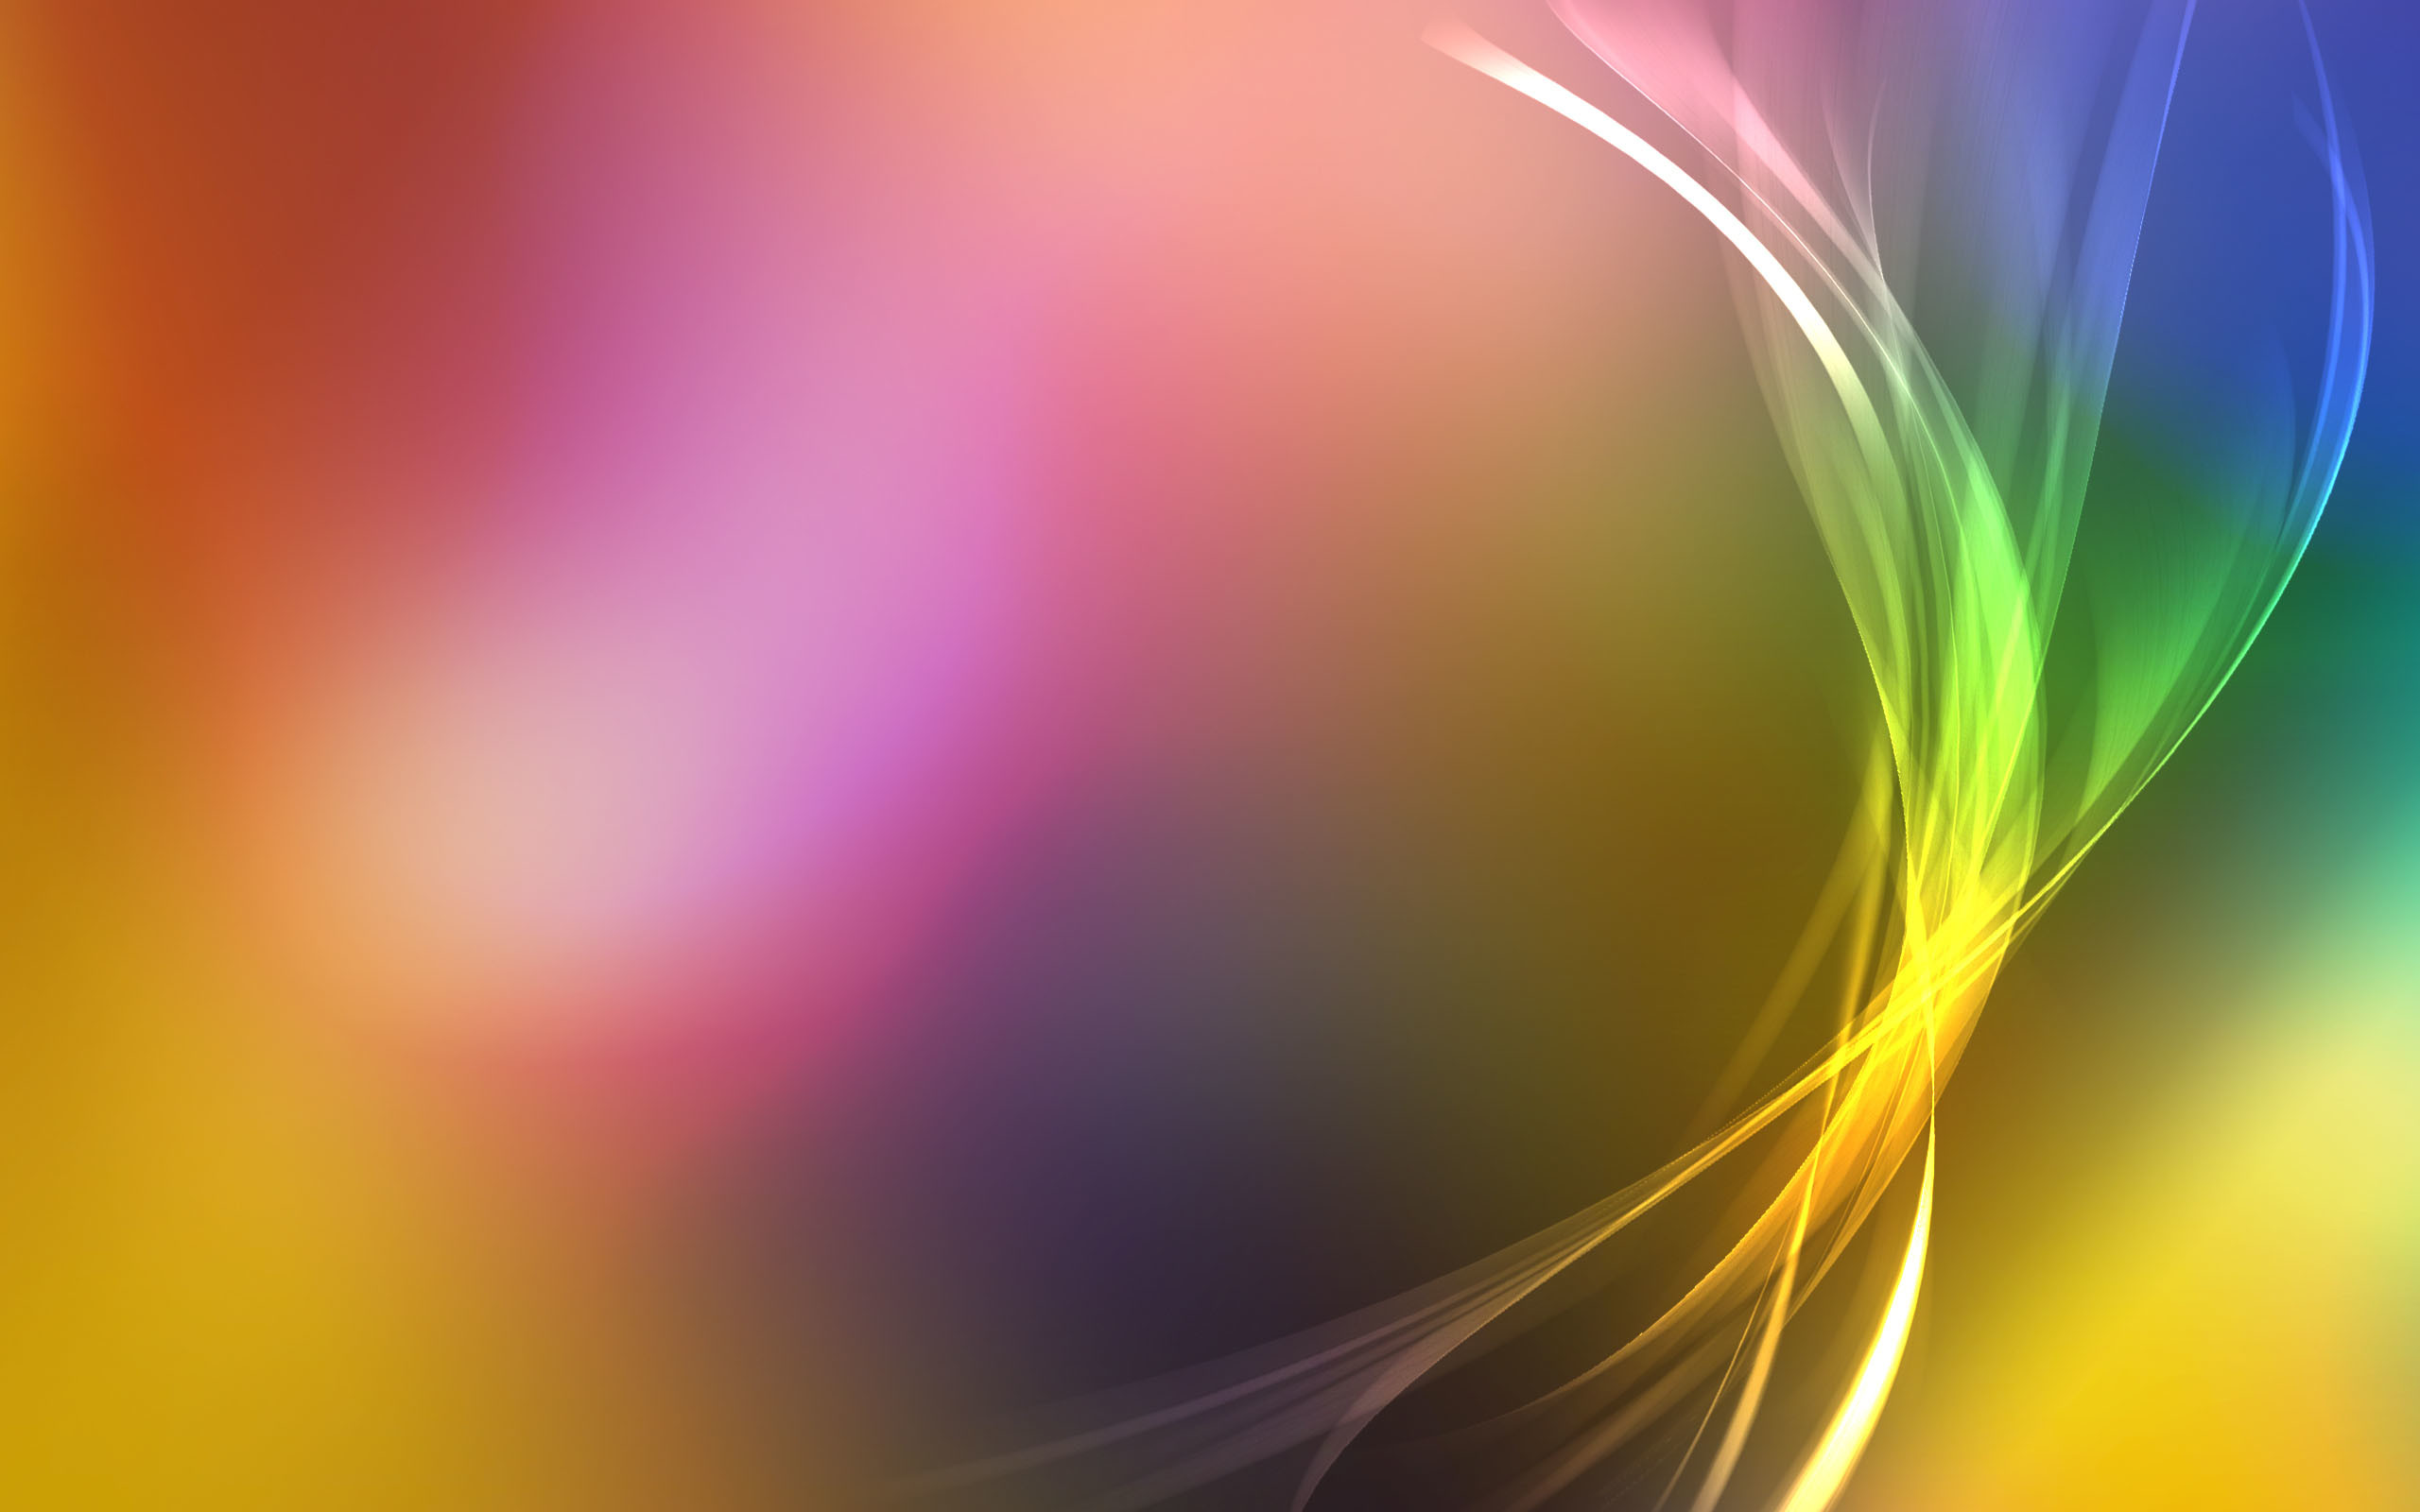 2560x1600 Colorable Wallpaper Wallpapersafari Colorful Wallpapers Hd. how to decorate  a small space. paint colors ...